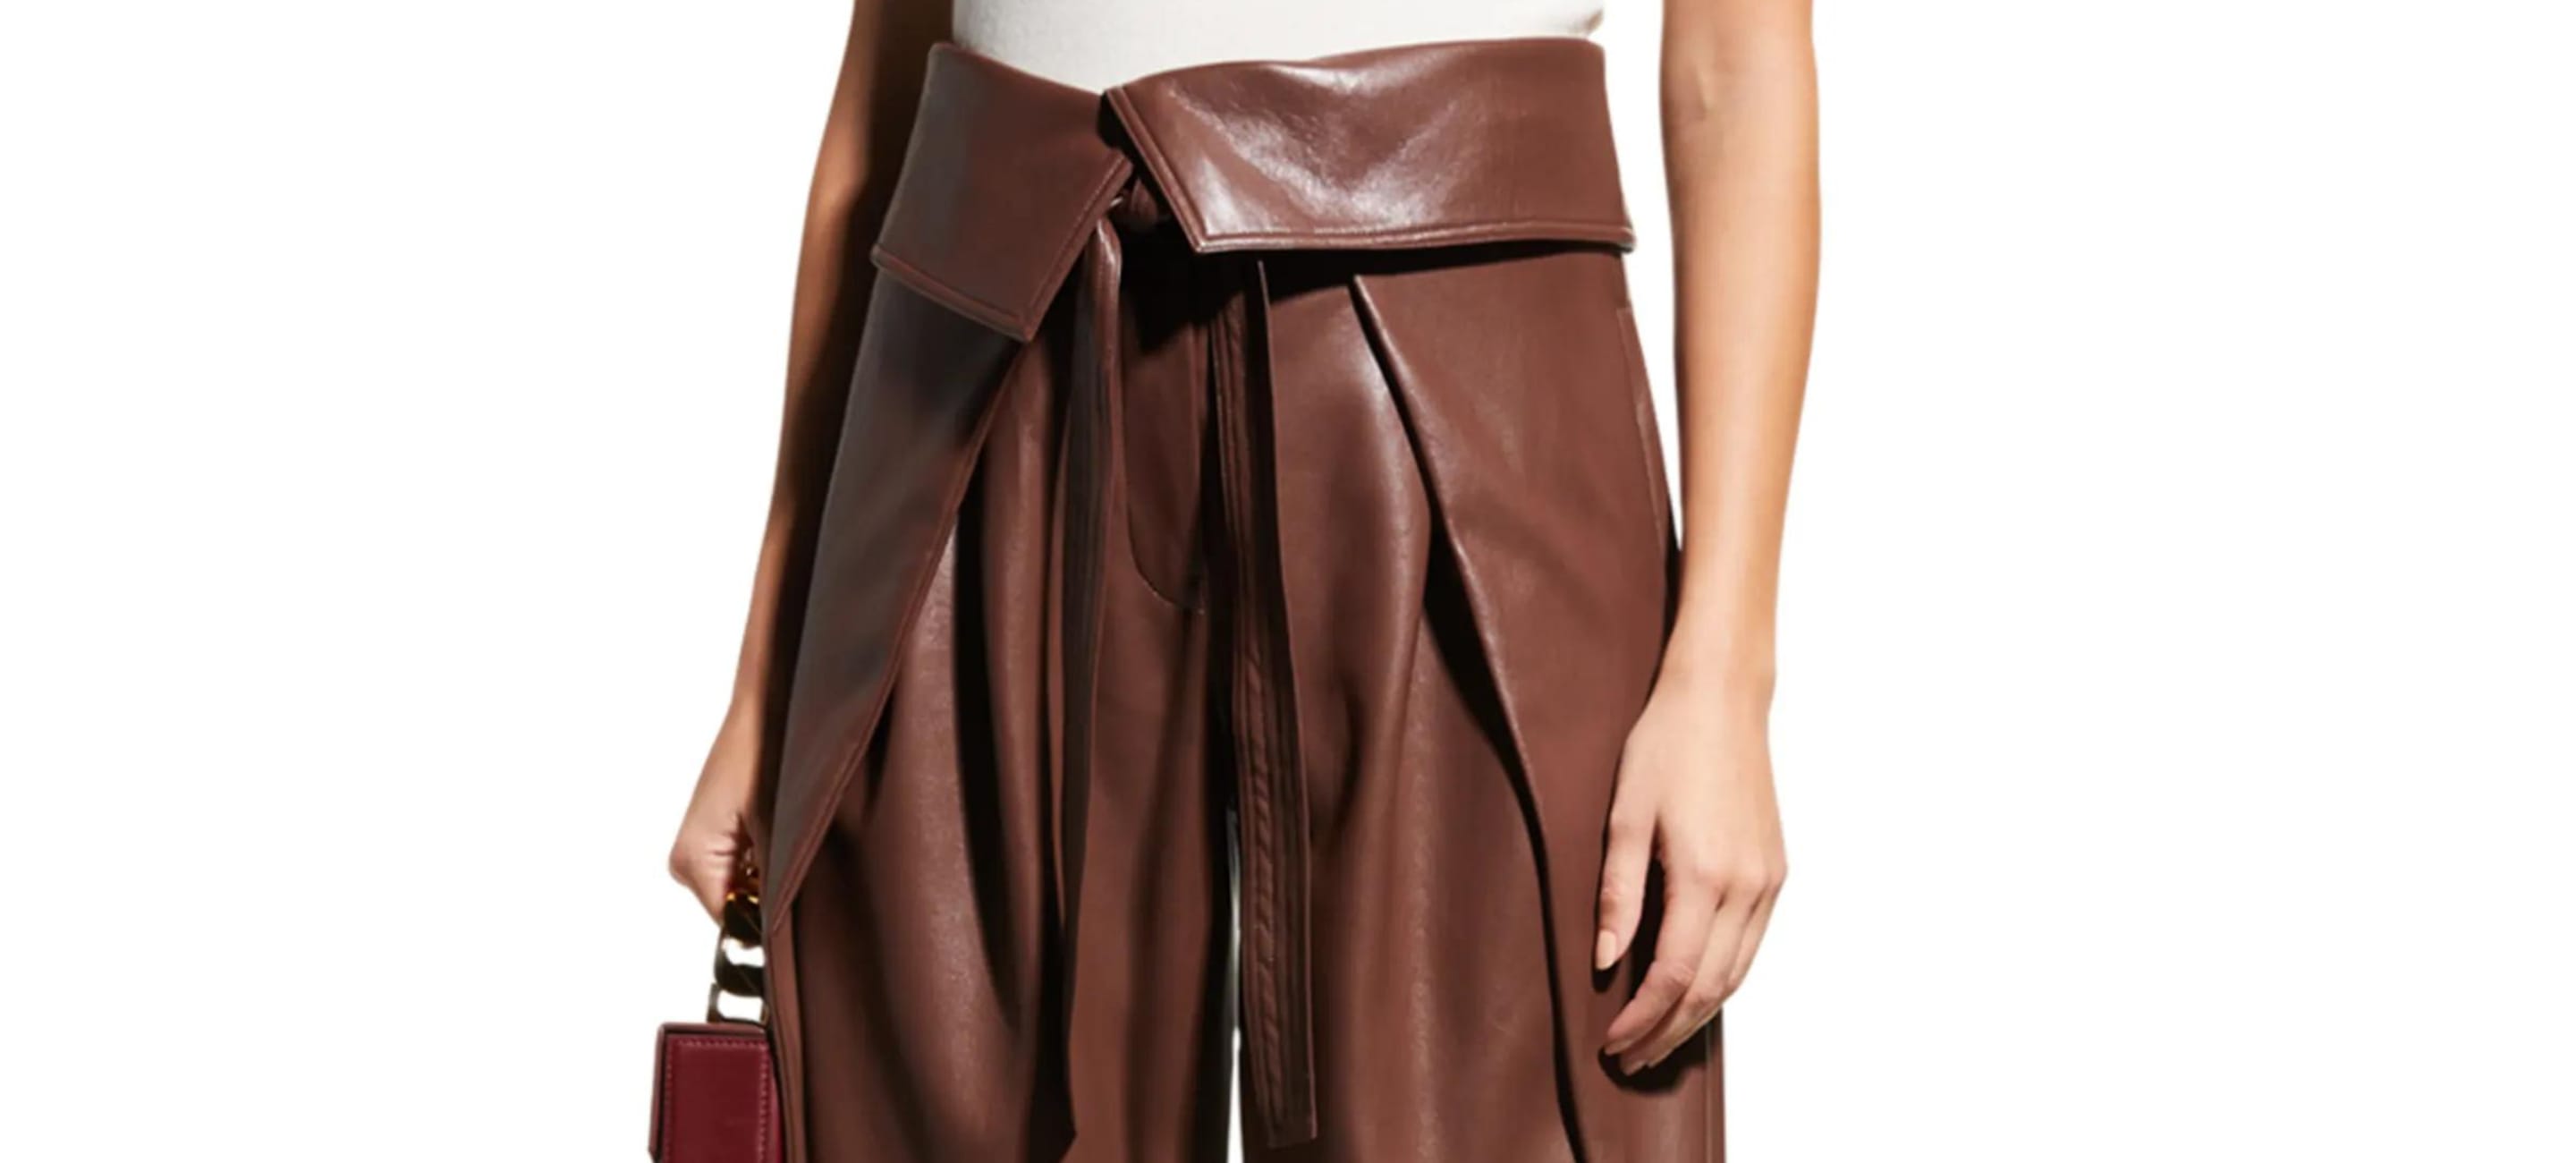 Dark Brown Leather Pants Outfits For Women (20 ideas & outfits)